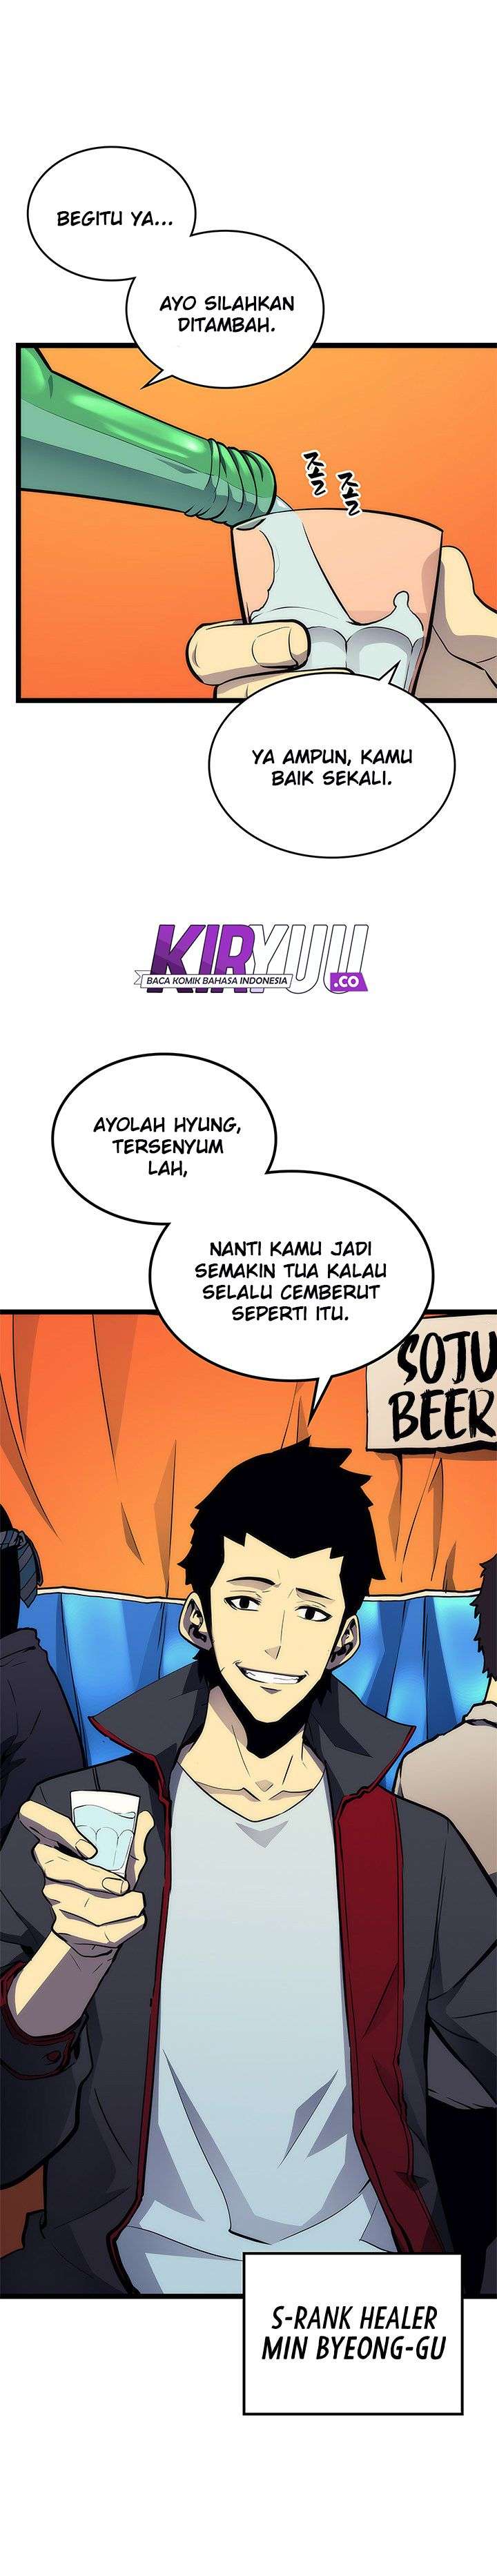 Solo Leveling Chapter 89 Image 2